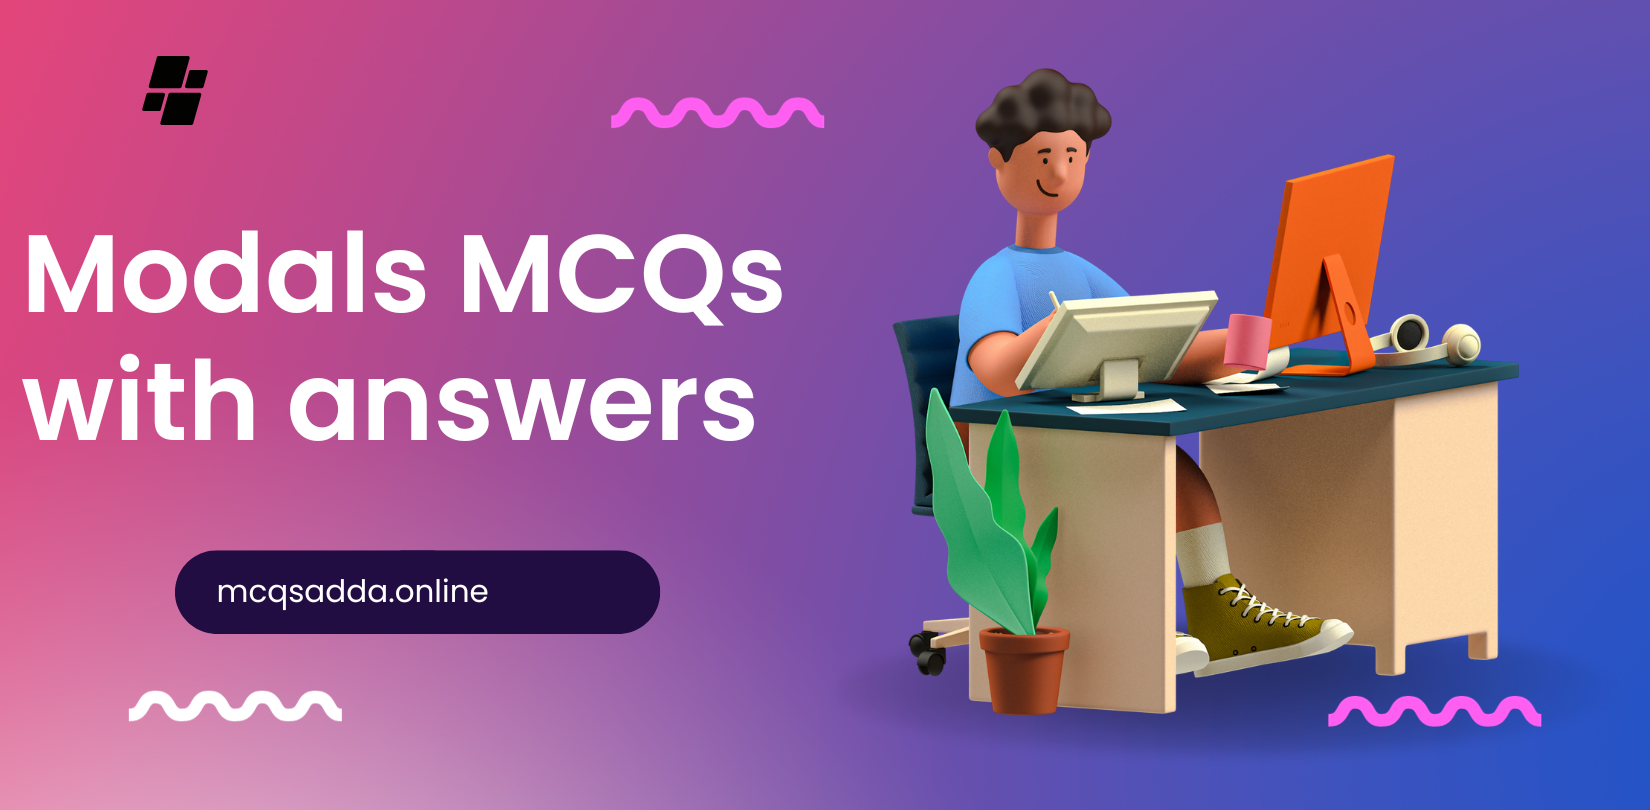 Modals MCQs with answers